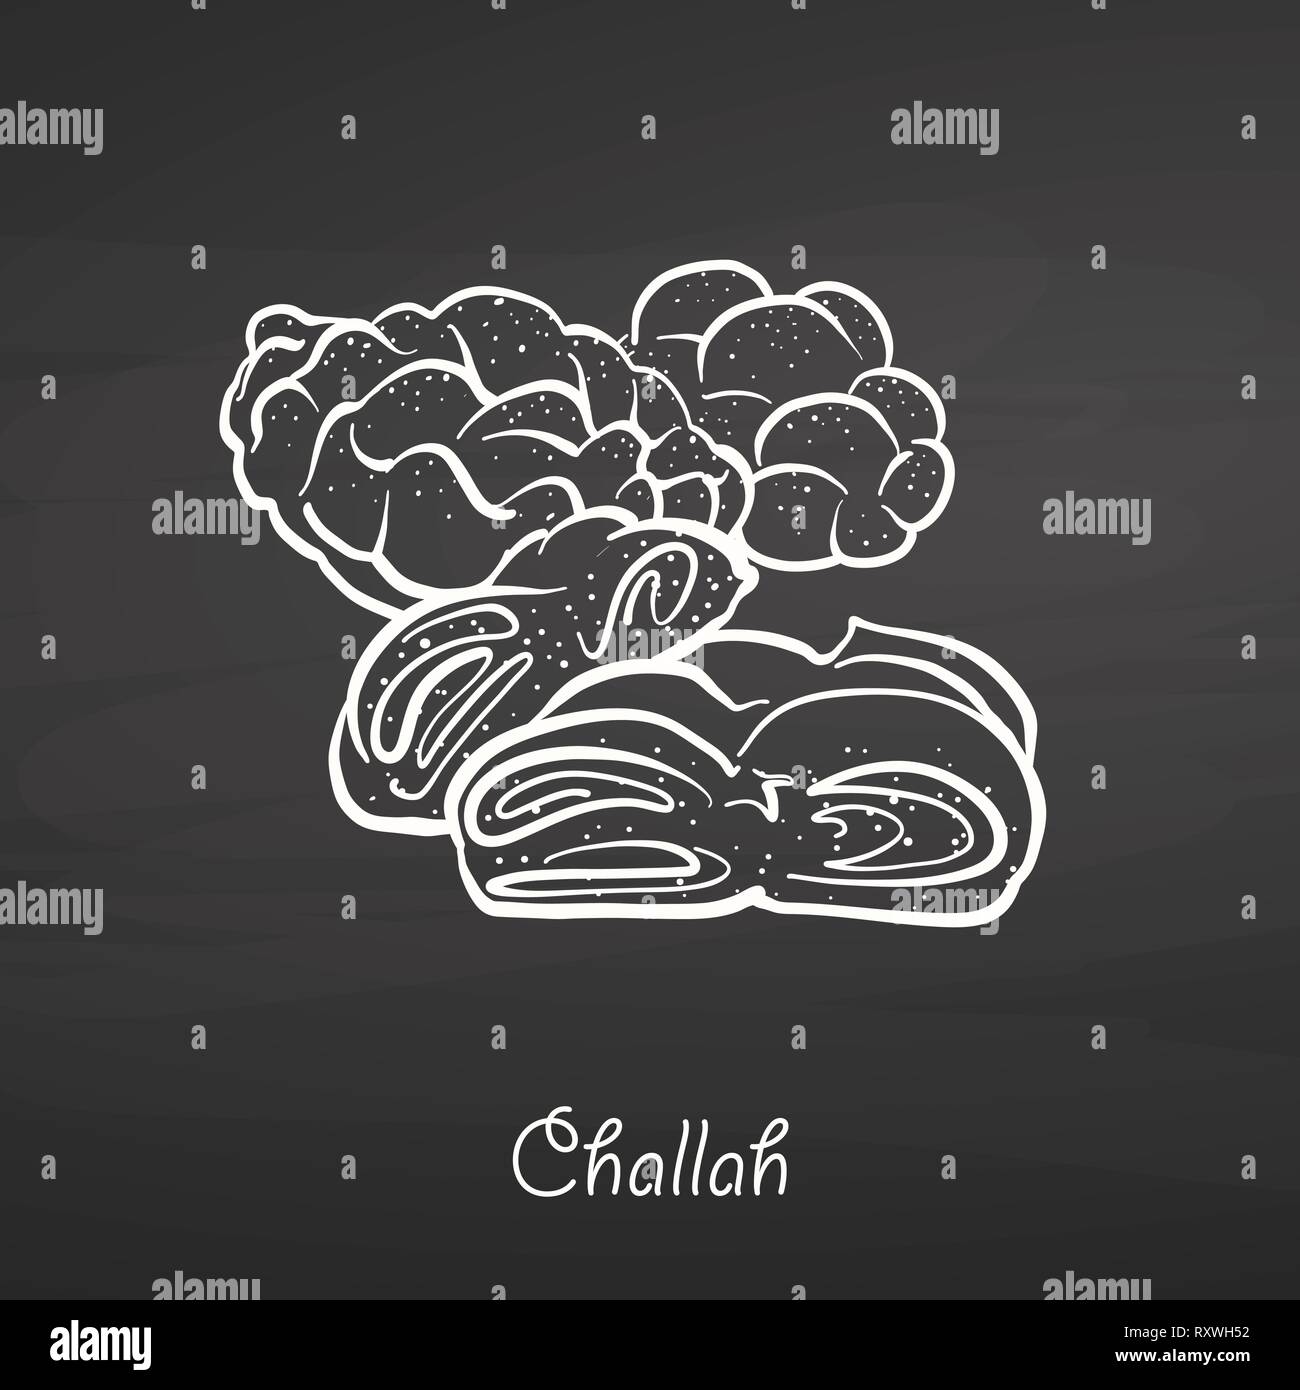 Challah food sketch on chalkboard. Vector drawing of Leavened, usually known in Poland and Israel. Food illustration series. Stock Vector